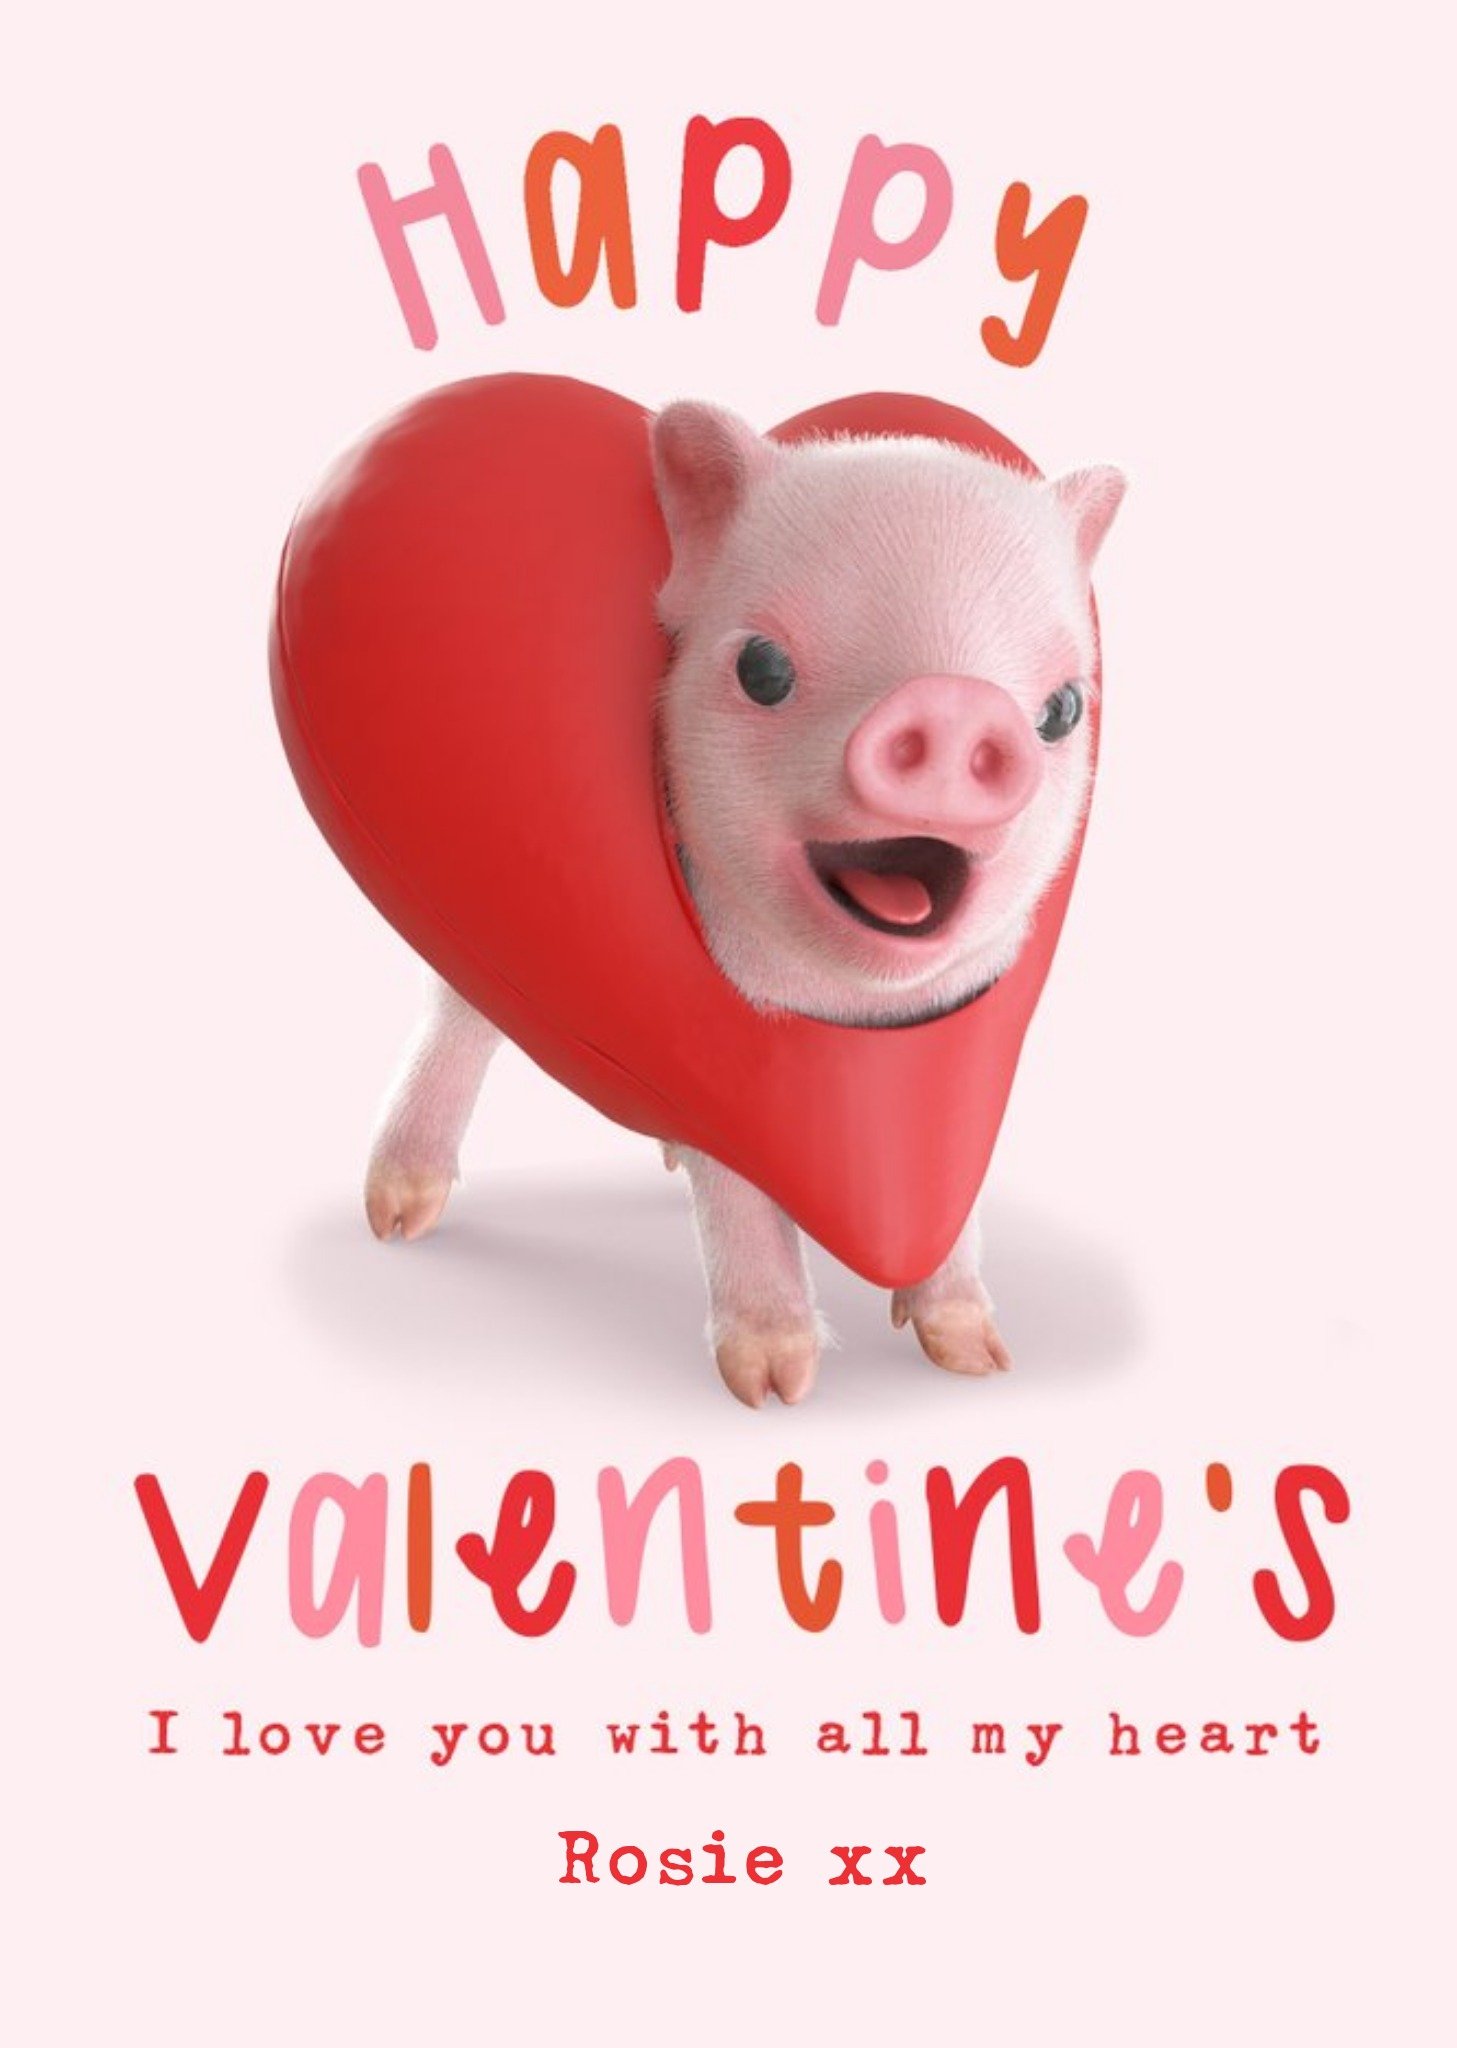 Moonpig Exclusive Moonpigs Love You With All My Heart Heart Valentine's Day Card Ecard